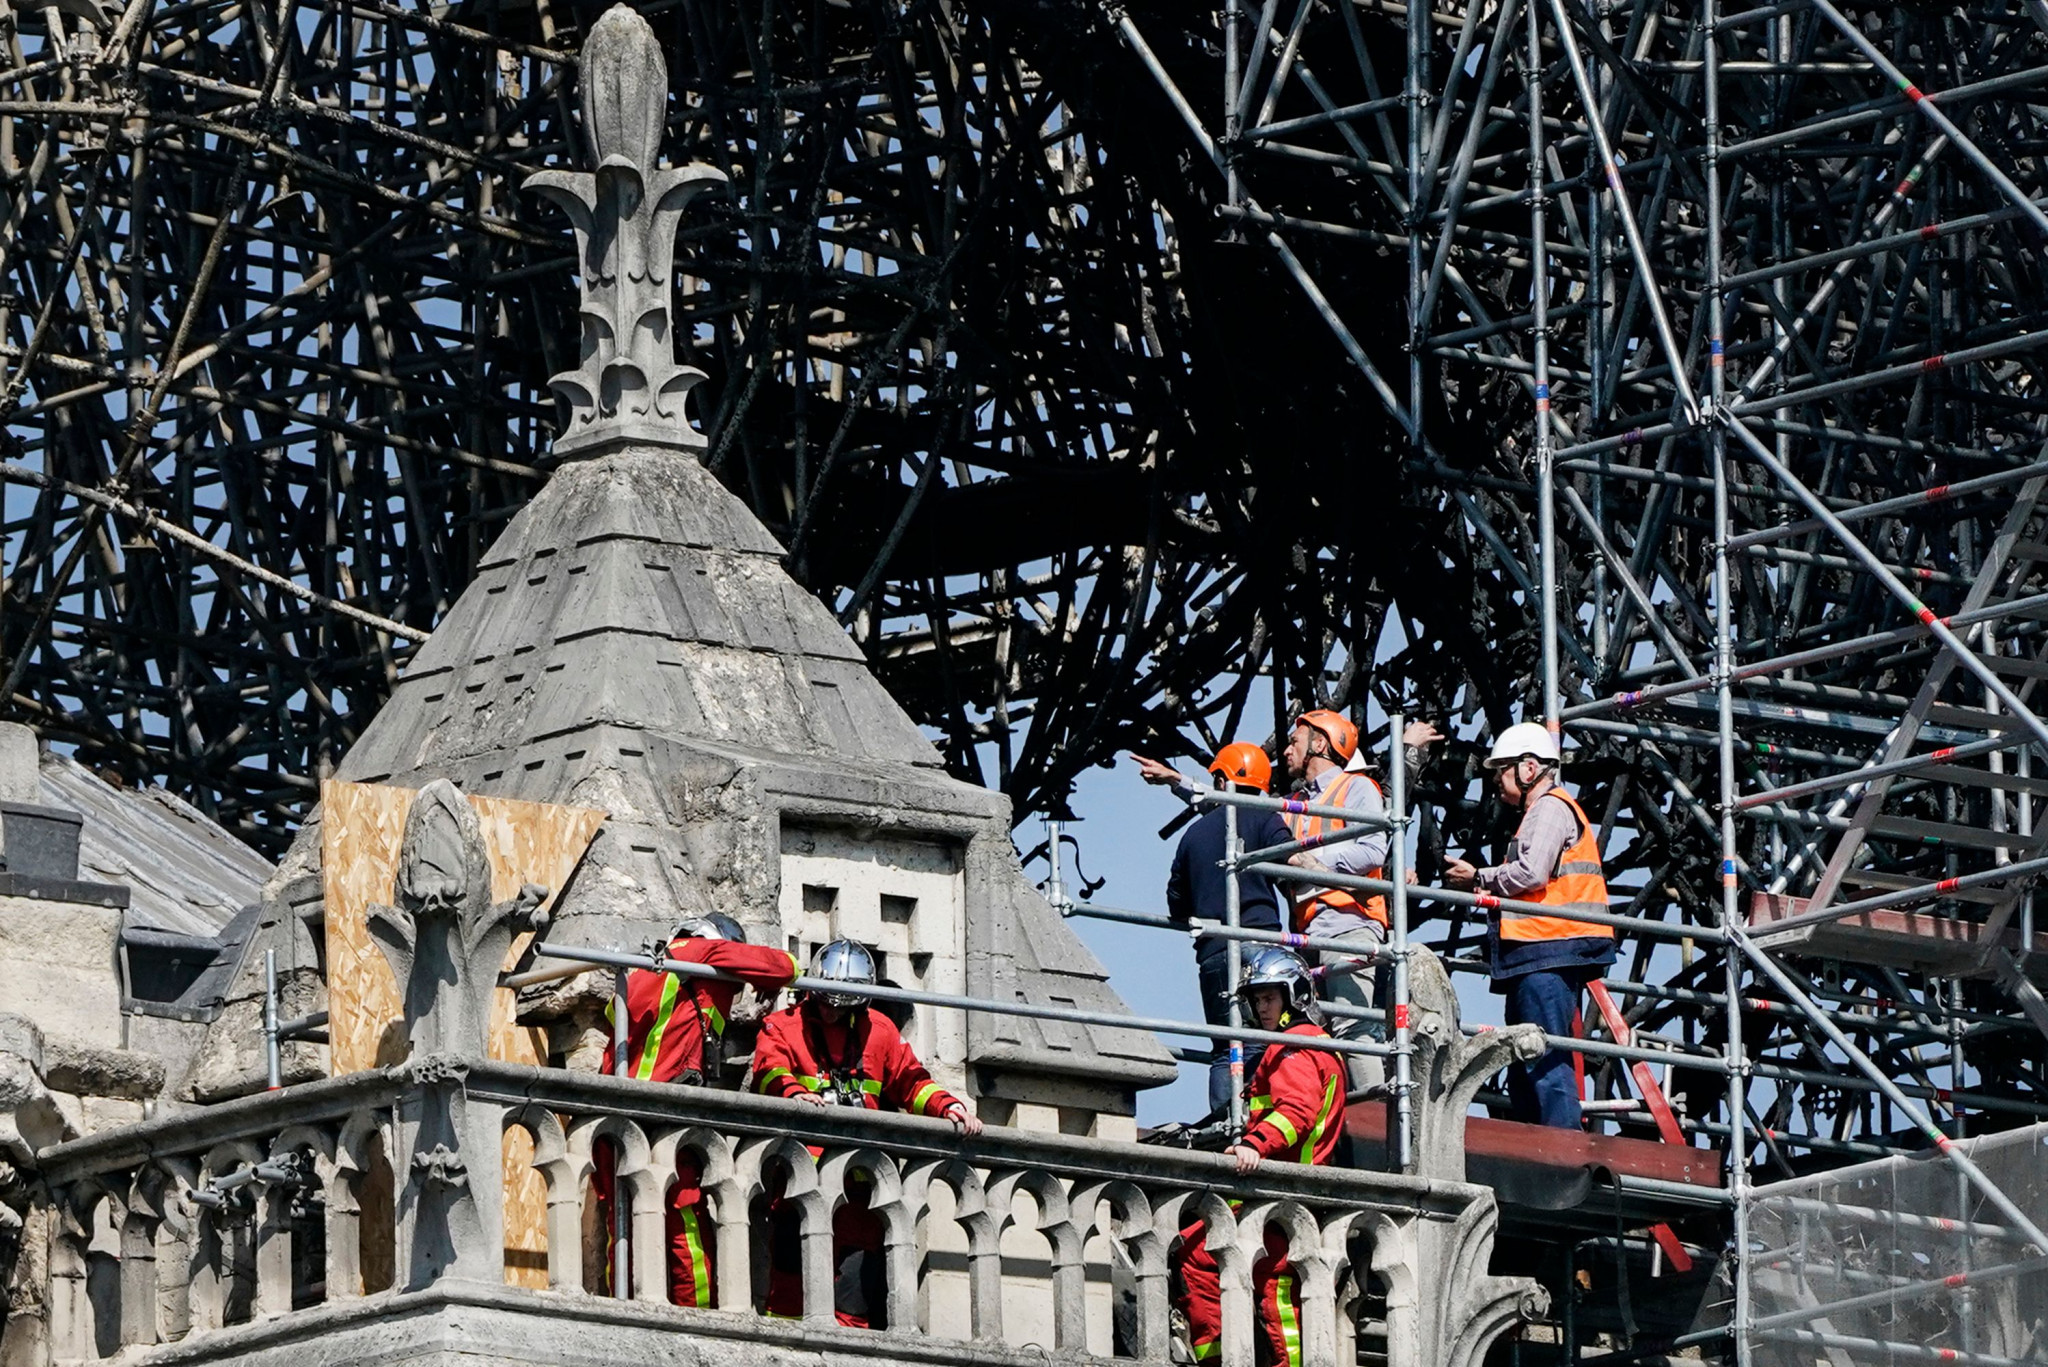 First event of "Paris 2024 Club" to be dedicated to Notre-Dame firefighters 